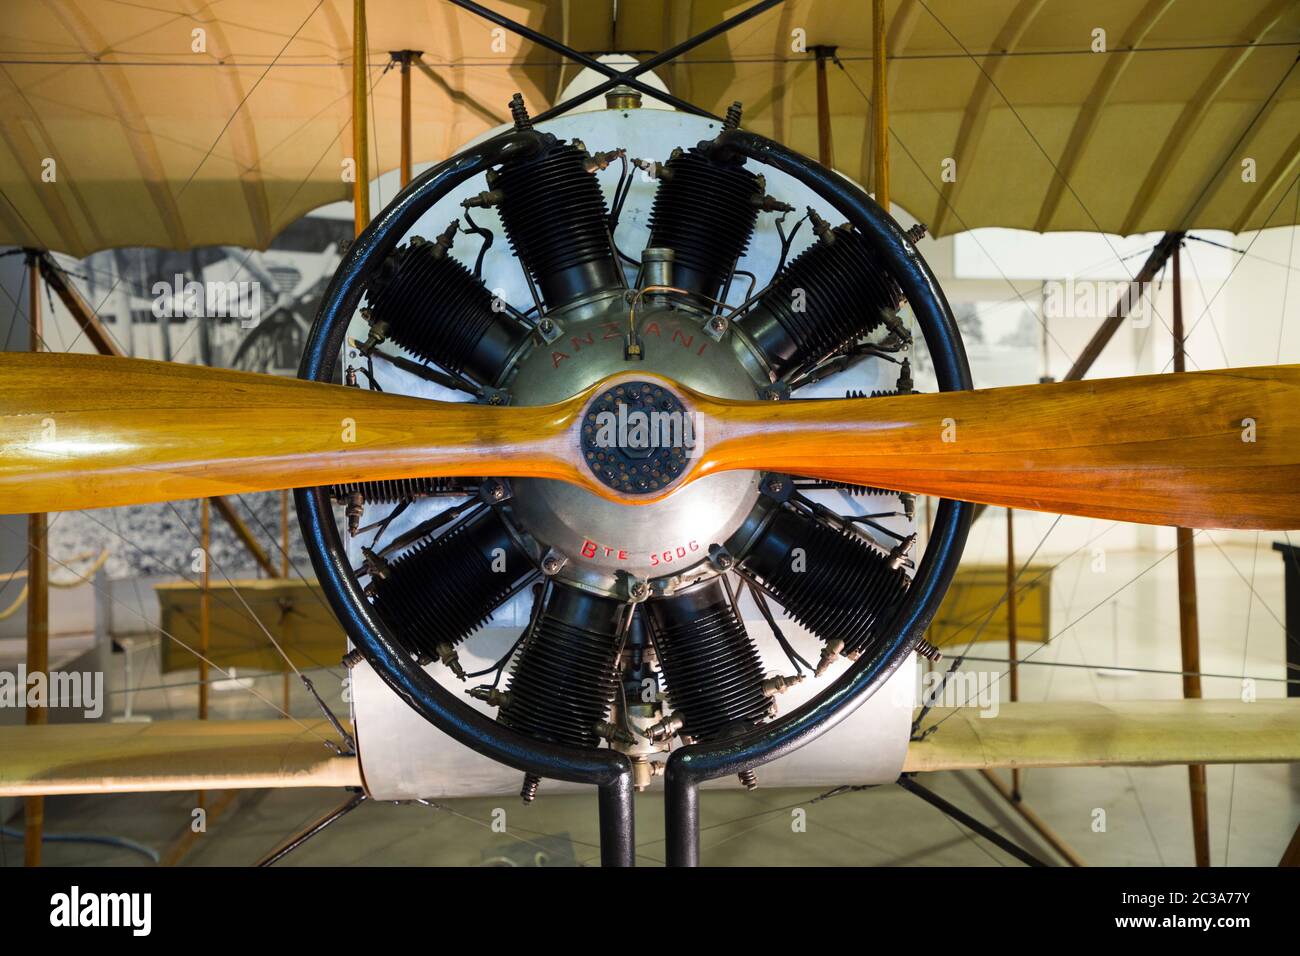 Caudron G.3 Biplane, powered by The Anzani 10, a 10 cylinder air-cooled radial aircraft engine / rotary engine. The French plane flew from 1914 during the First World War and afterwards, and is on show exhibit at the RAF Royal air force Museum, Hendon, London UK (117) Stock Photo